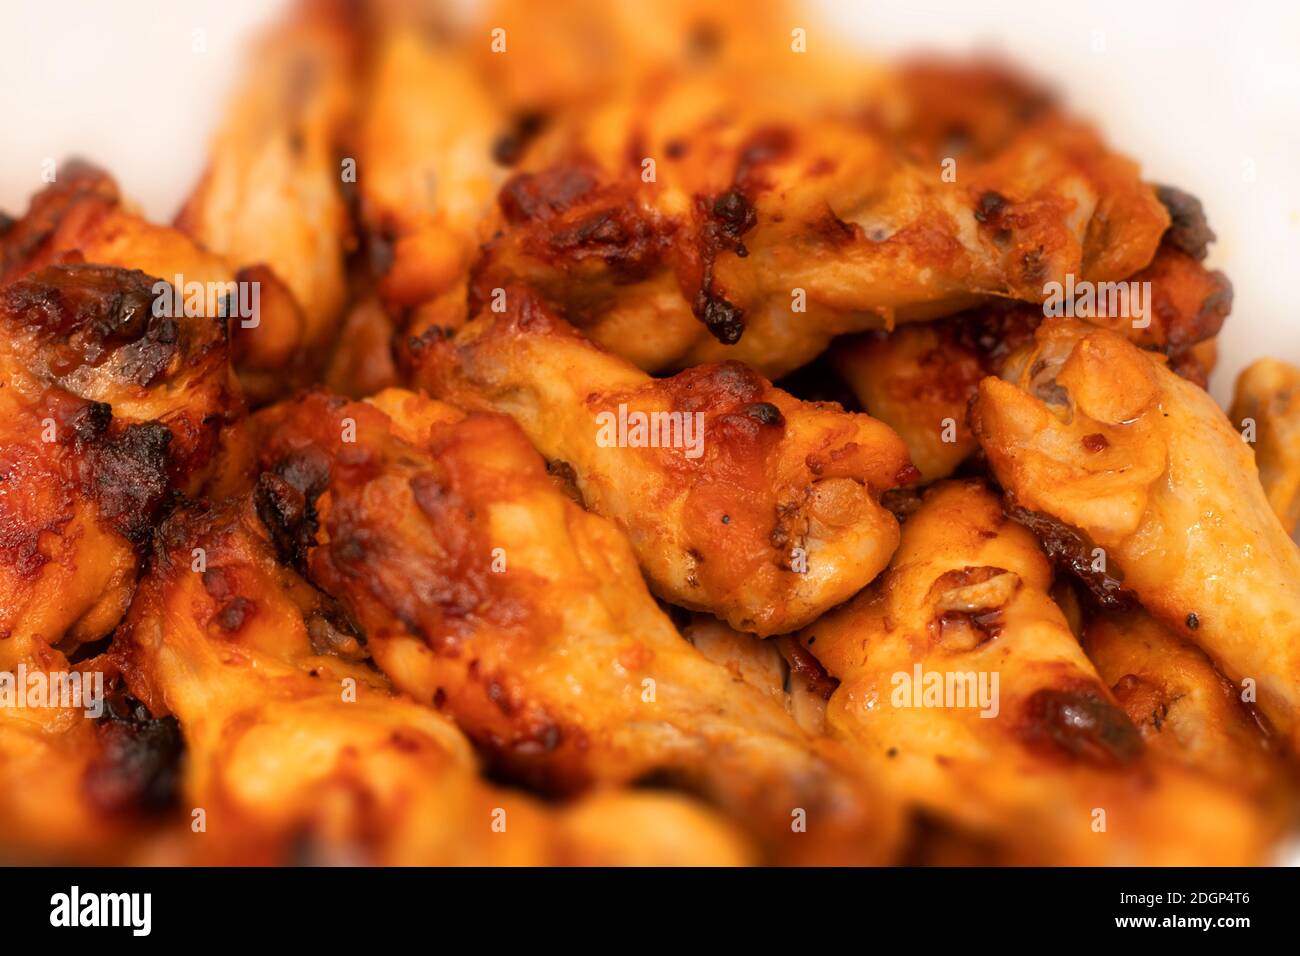 Delicious juicy fried buffalo chicken wings. Stock Photo